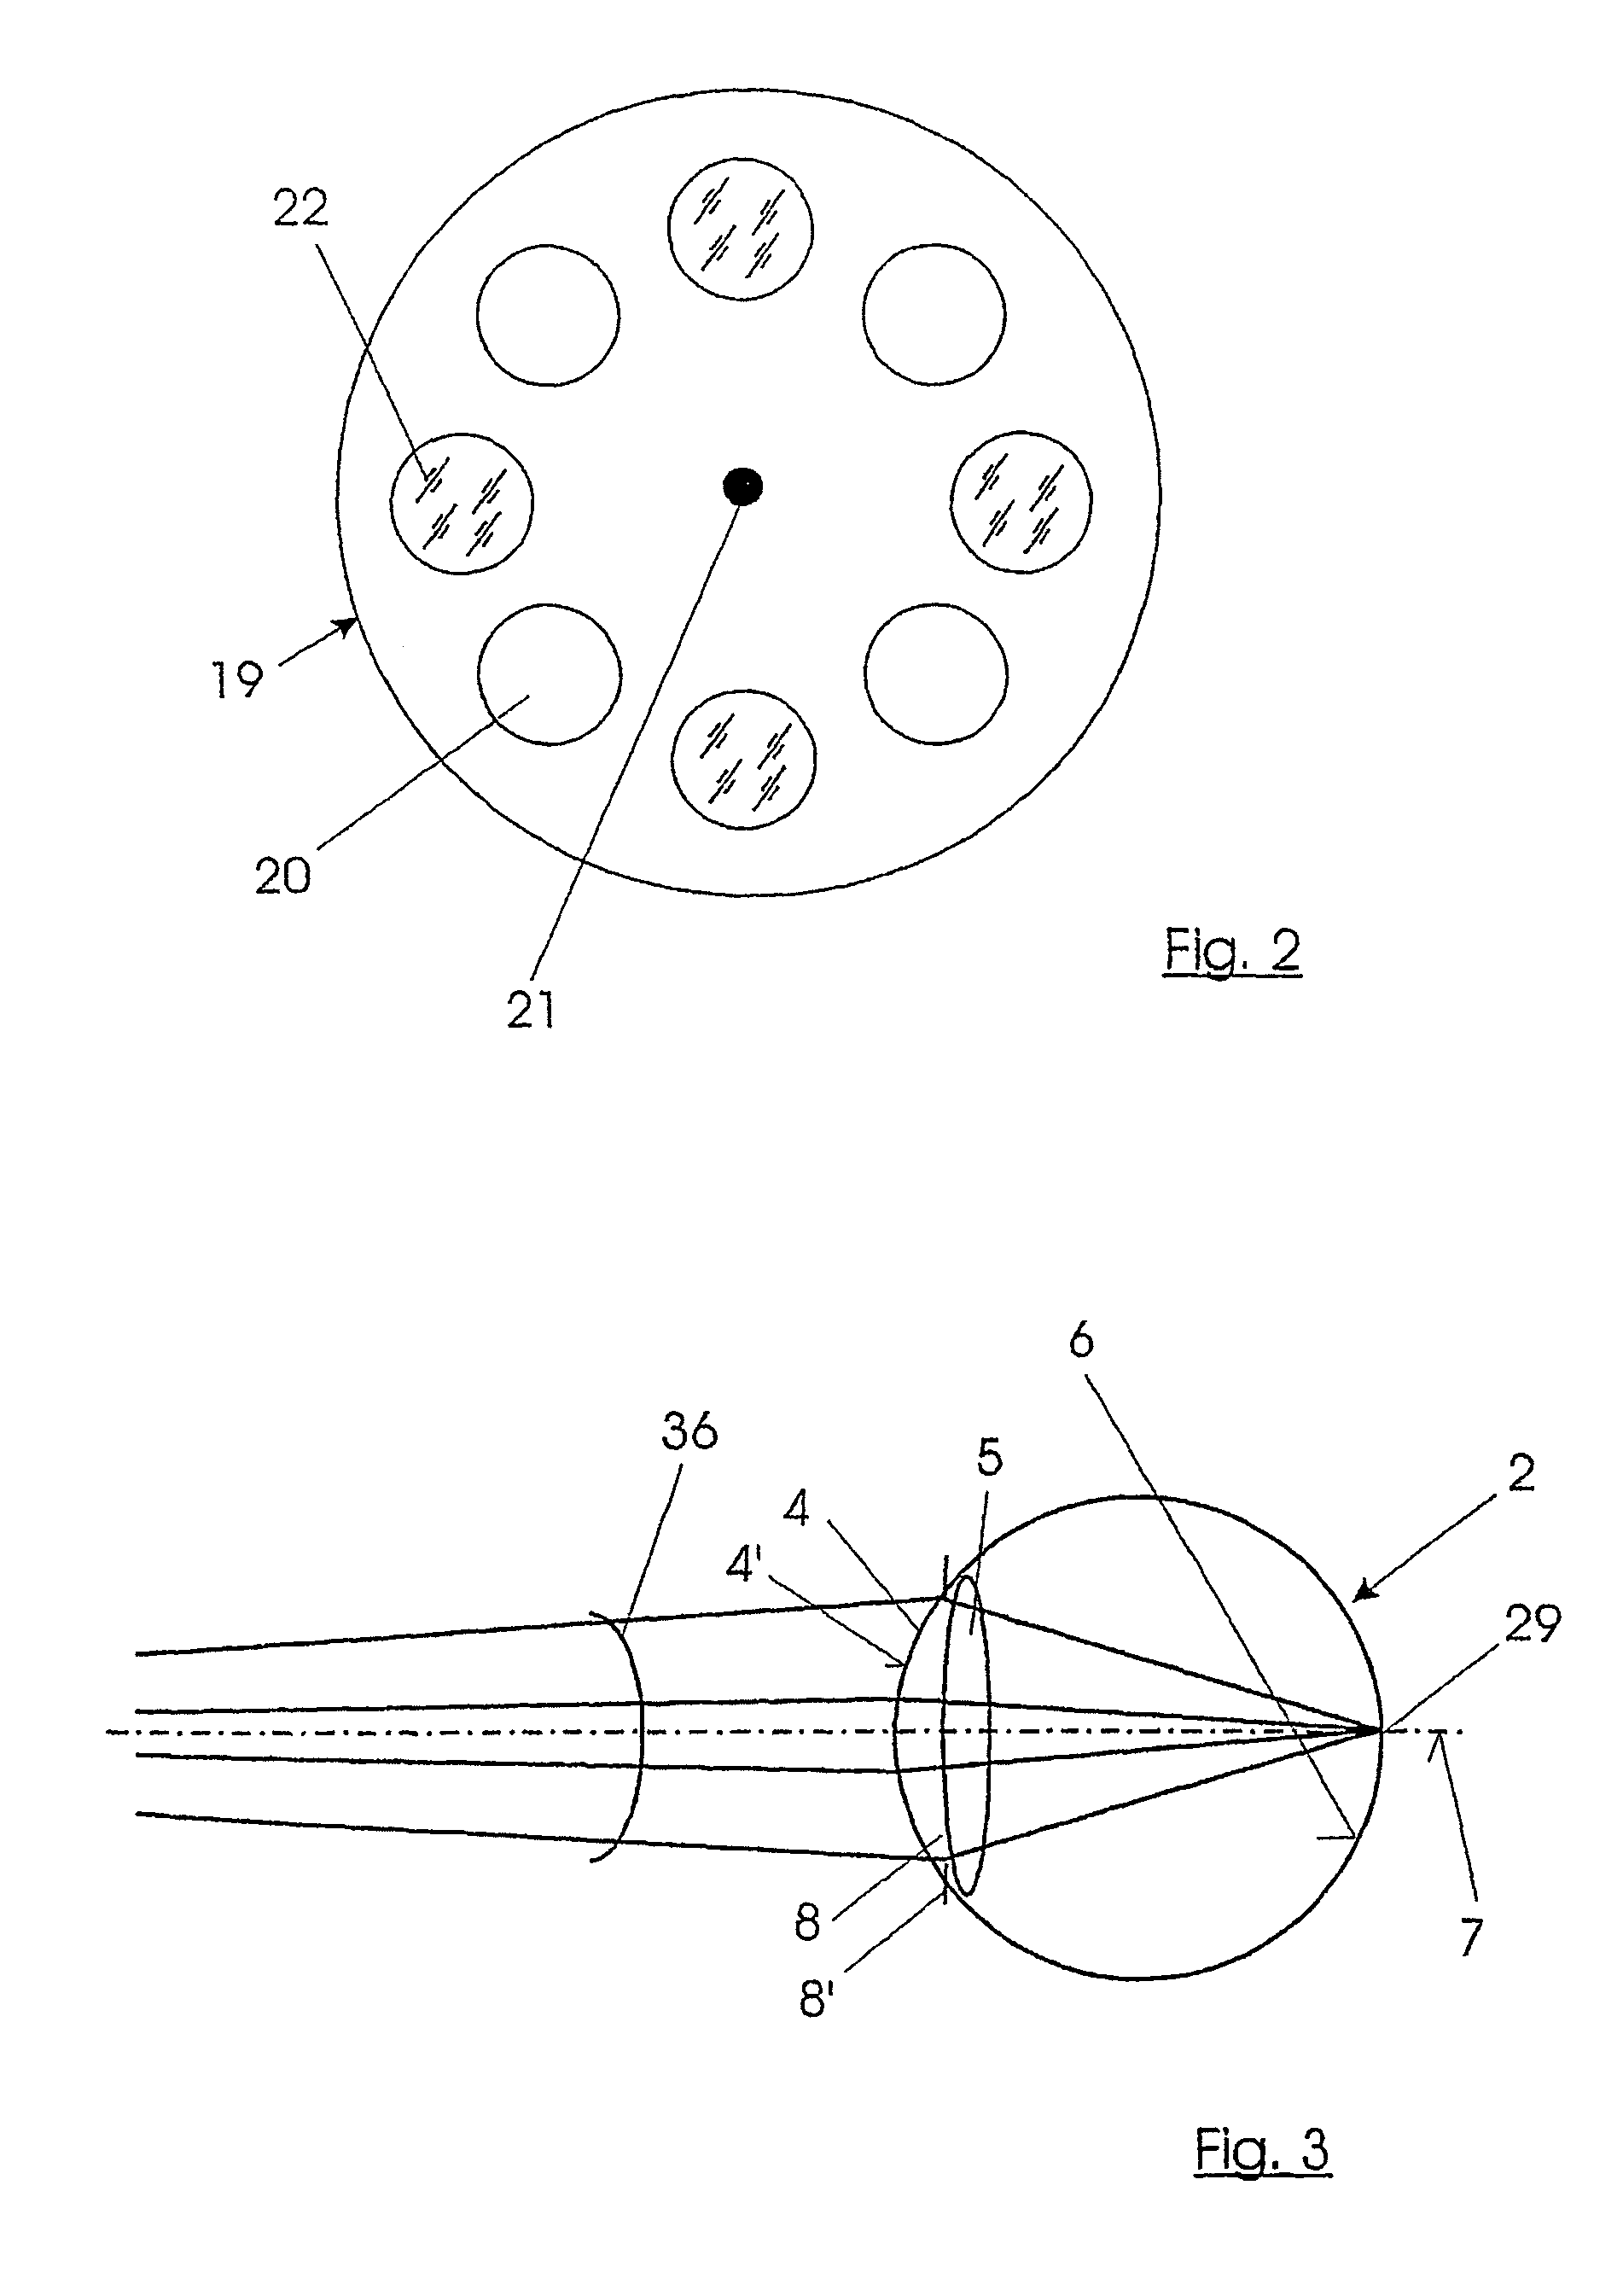 System for measuring the optical image quality of an eye in a contactless manner